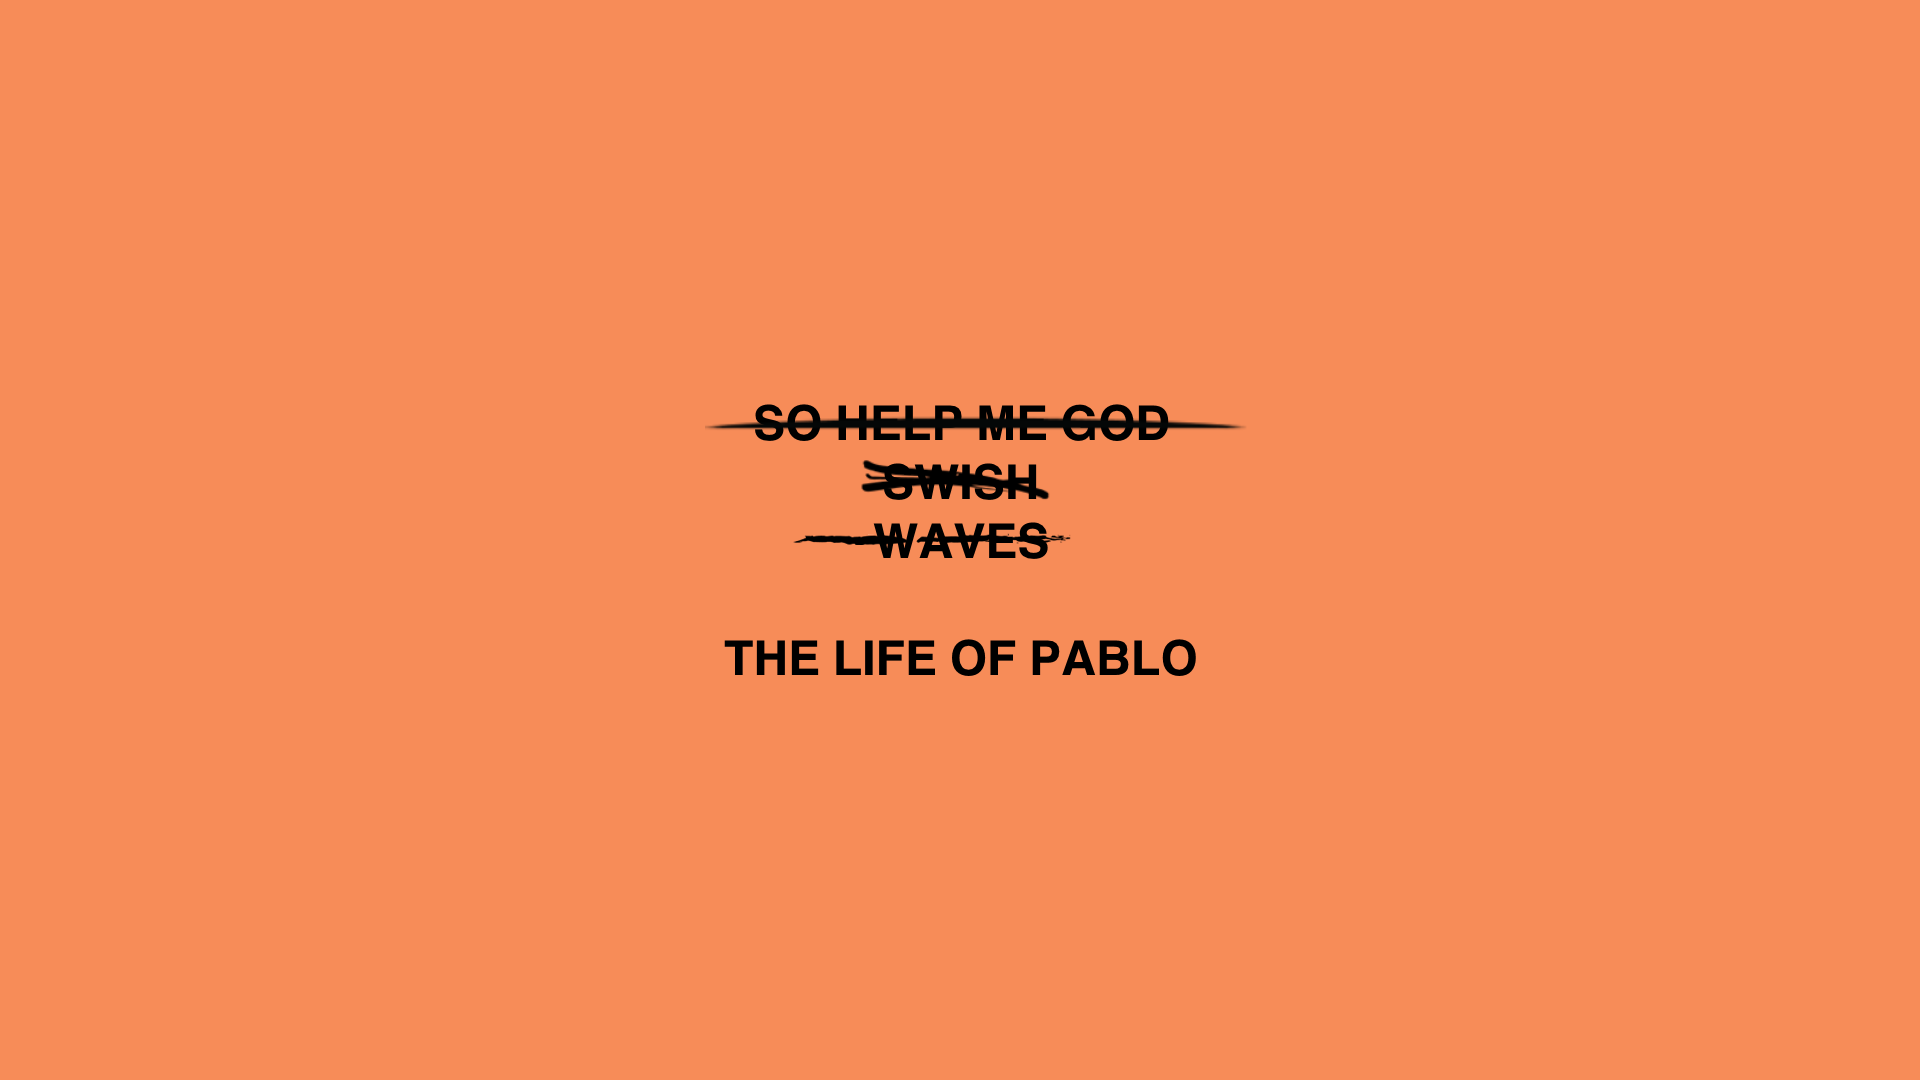 The Life of Pablo cover art iPhone wallpaper Created by Joel Osuna  Iphone  wallpaper Kanye west wallpaper Hype wallpaper